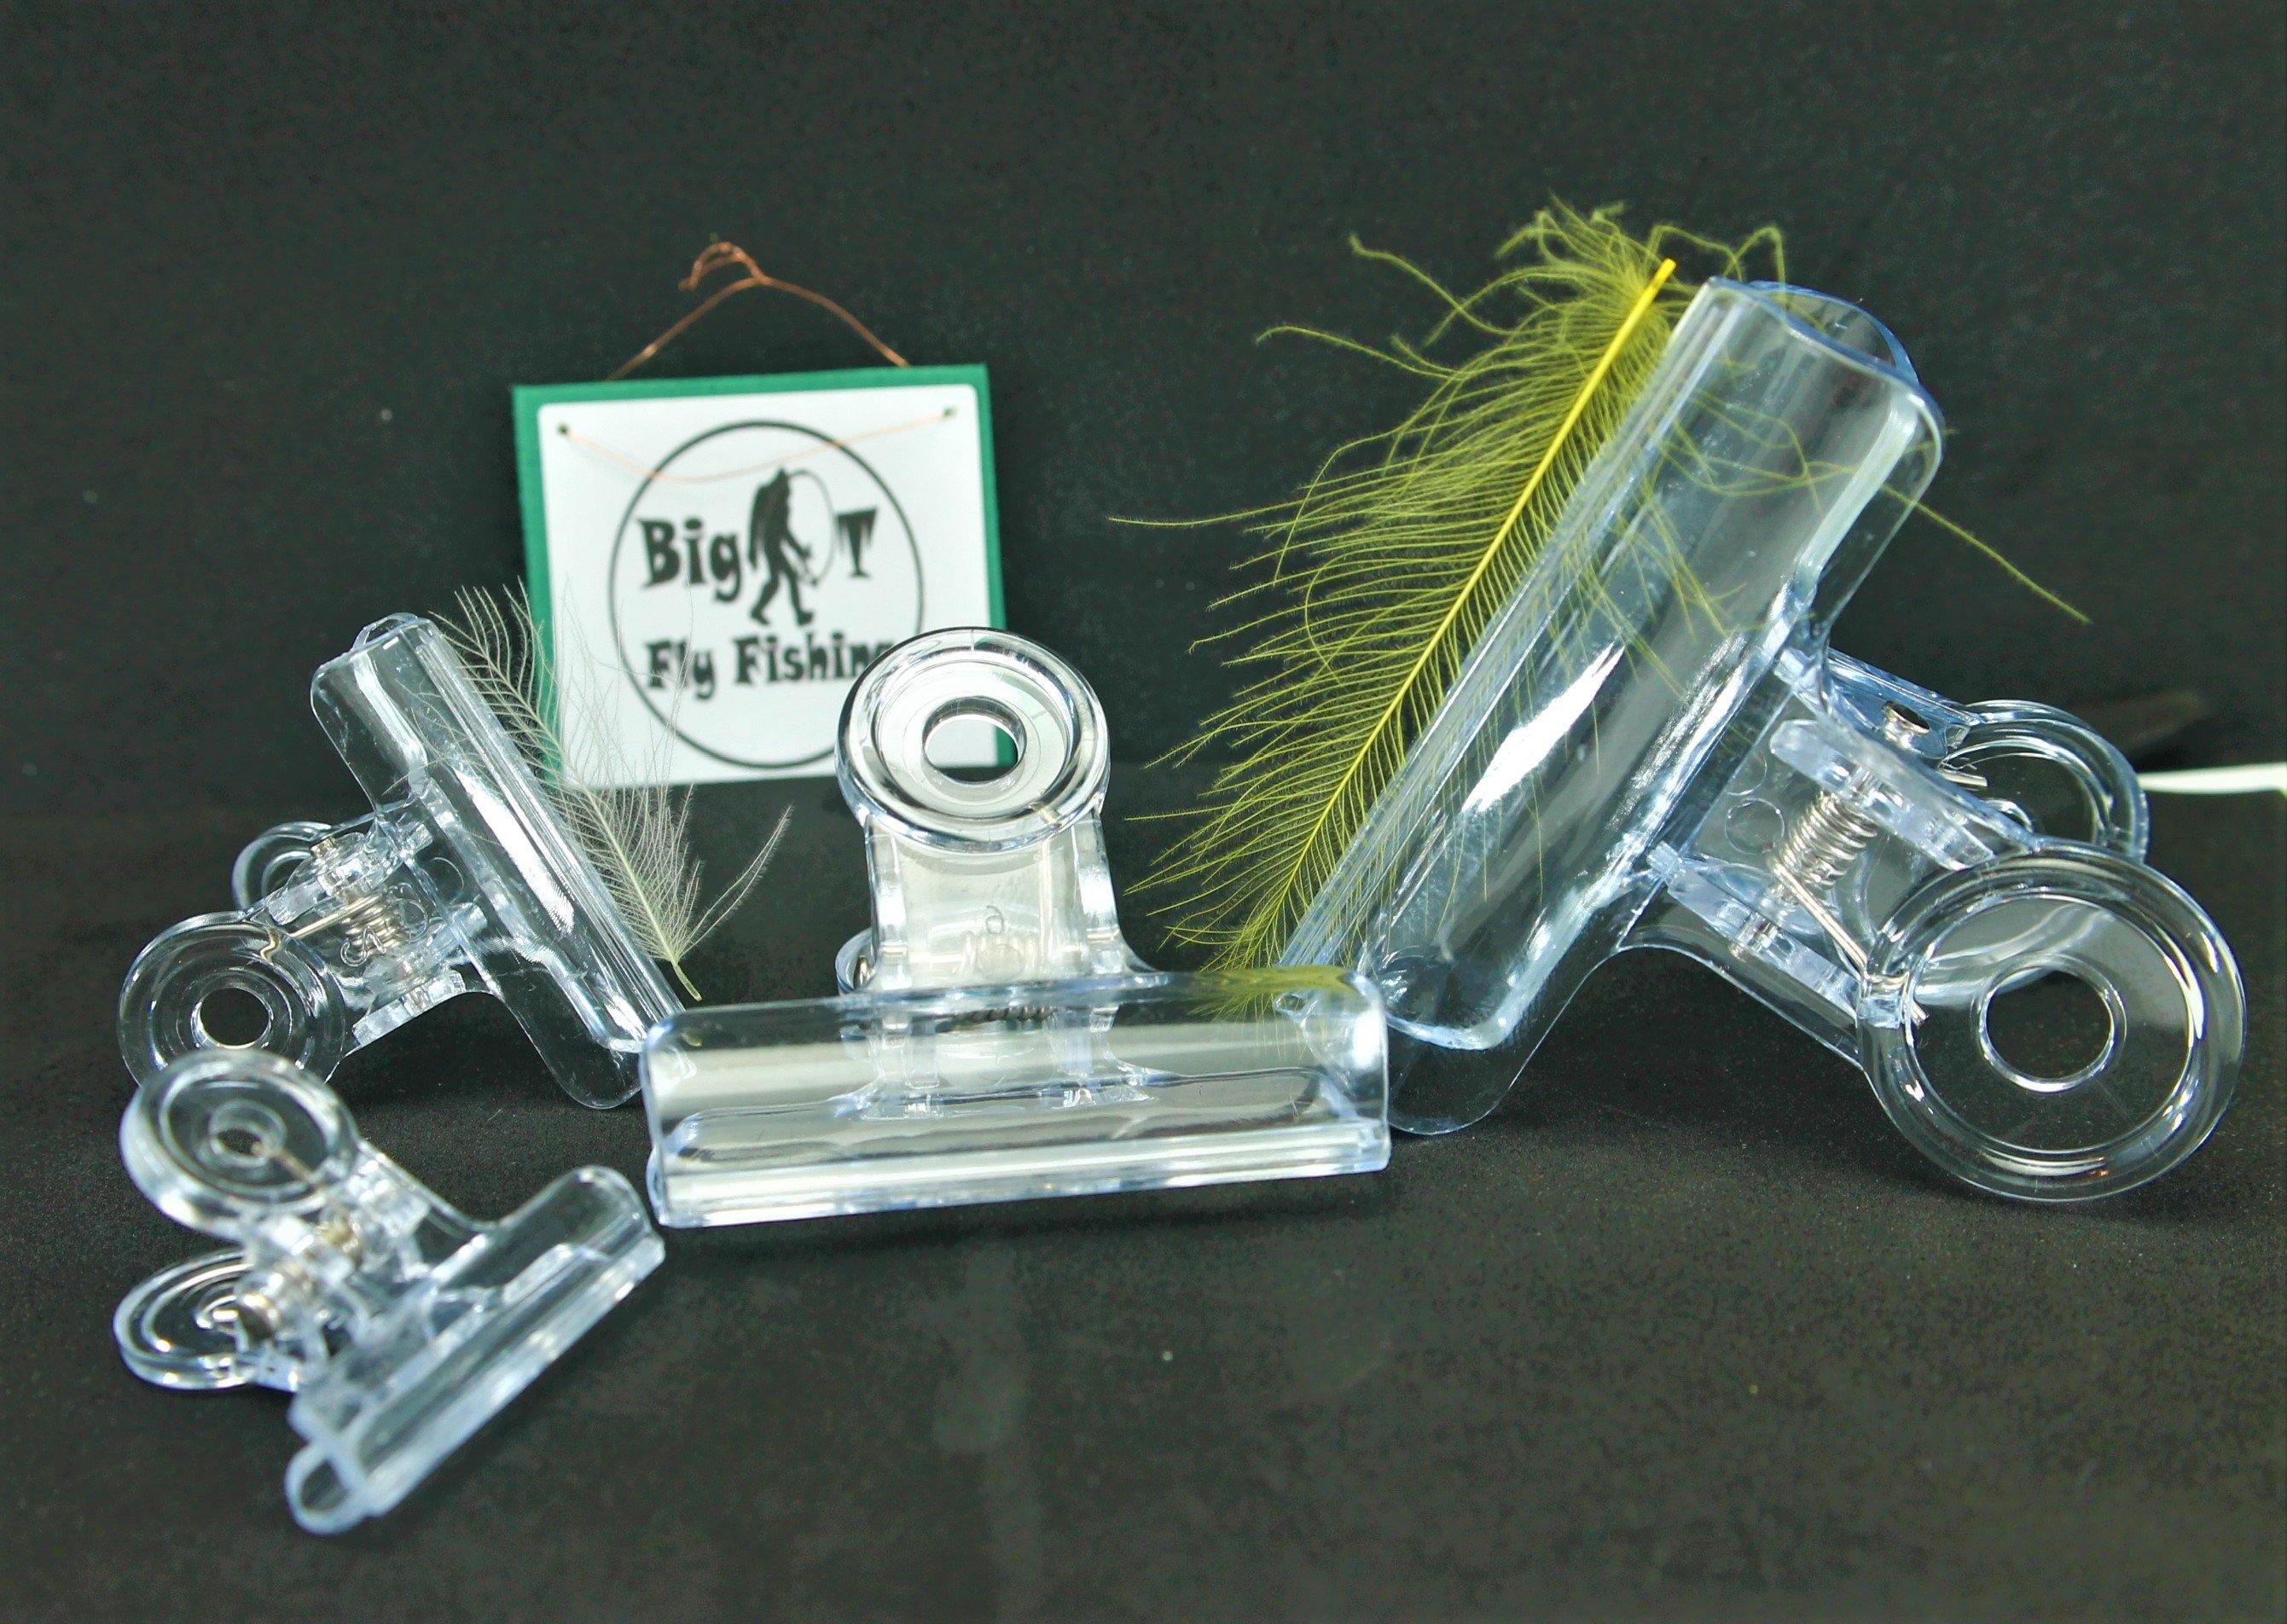 CDC/Materials Clip - 4 pack - Big T Fly Fishing